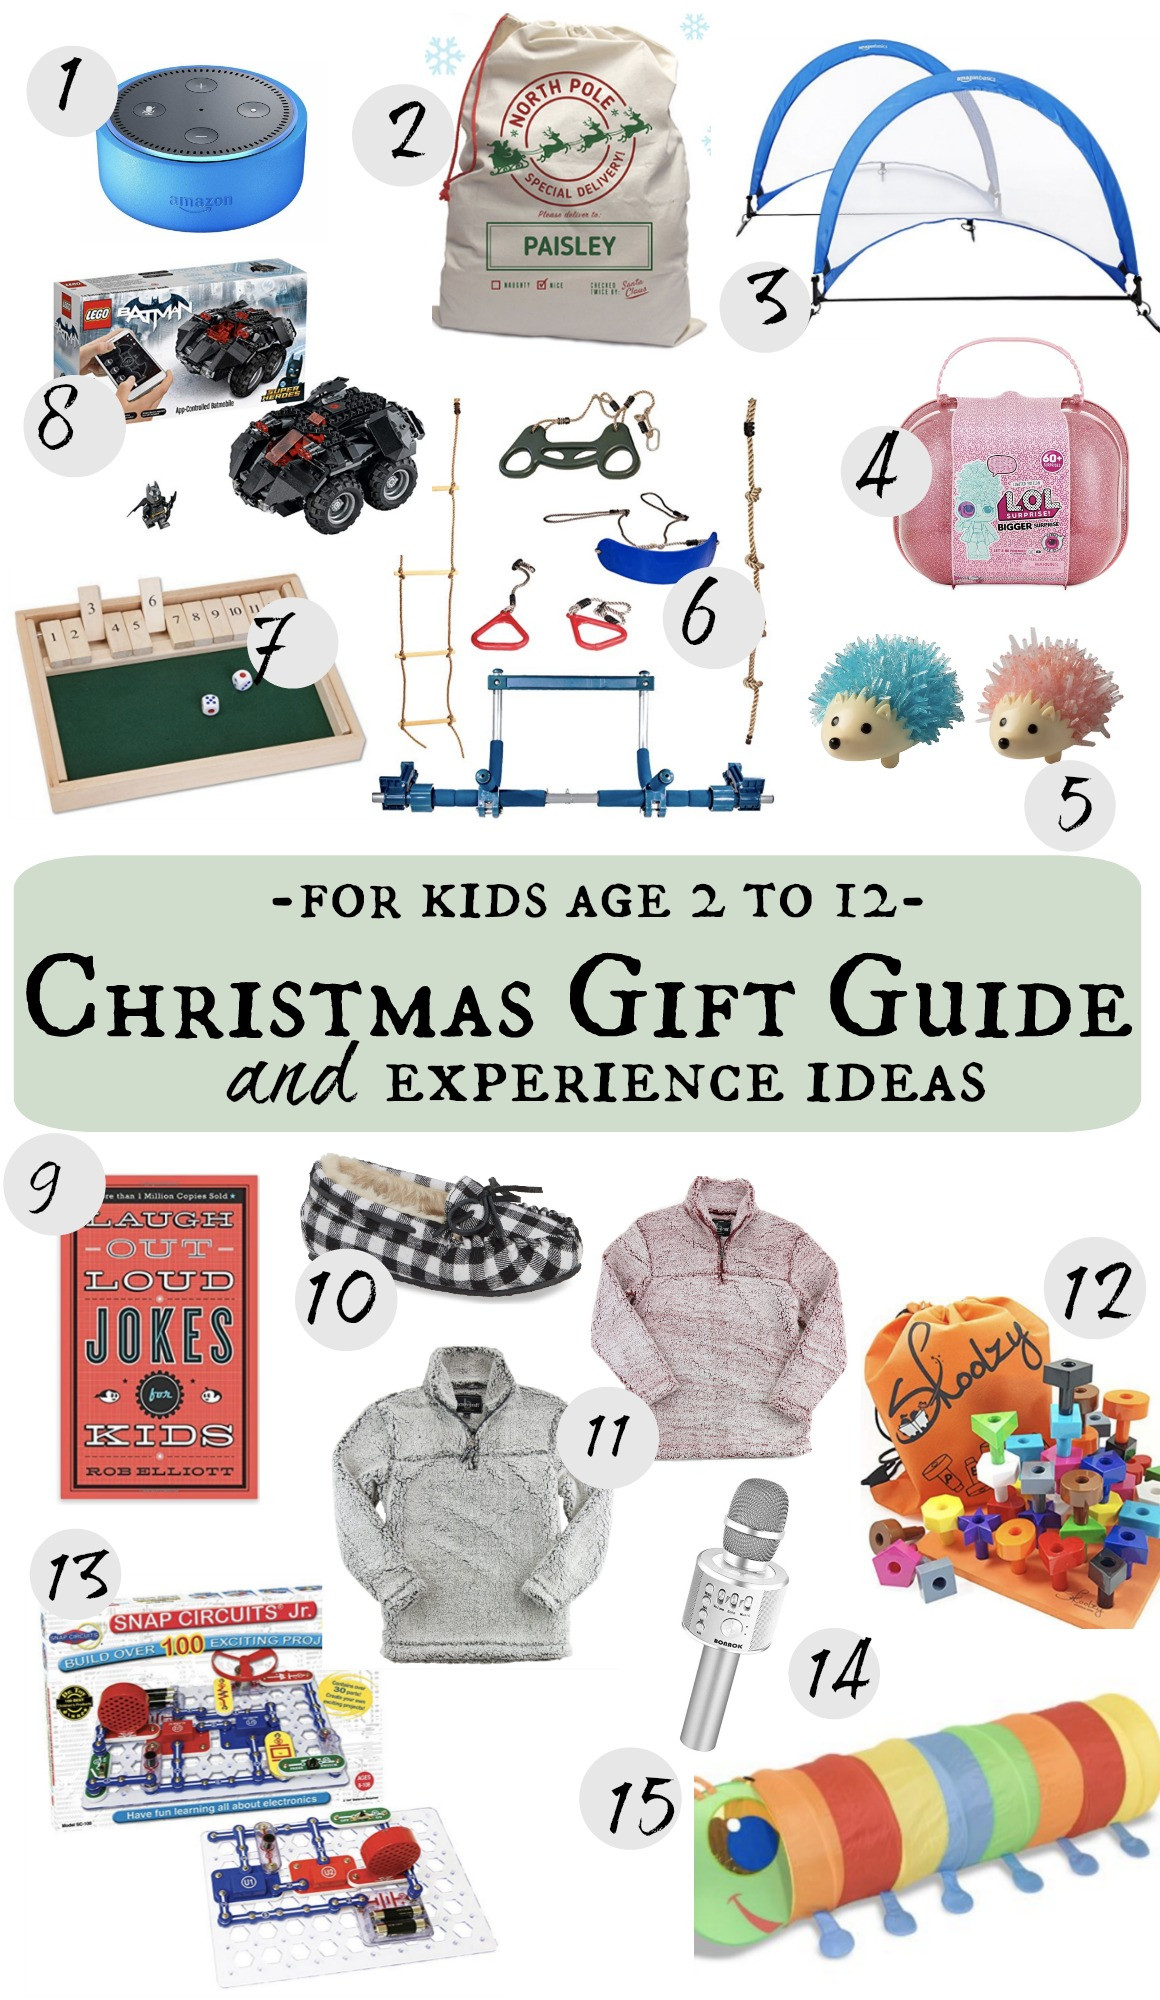 Experience Gifts For Kids
 Christmas Gift Guide for Kids with Experience Ideas too